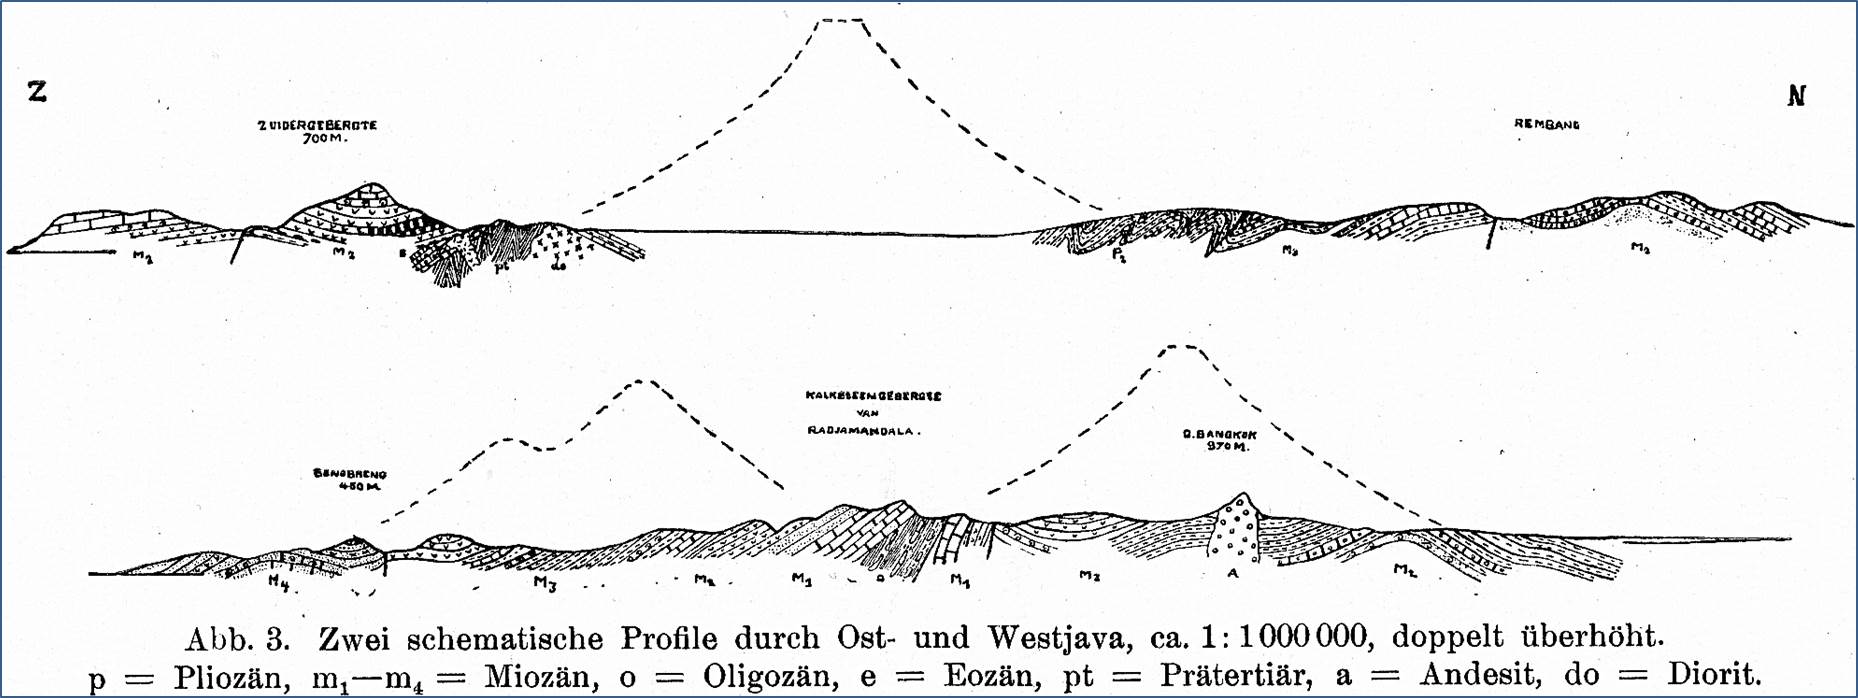 West Java Cross Section, Gerth 1931